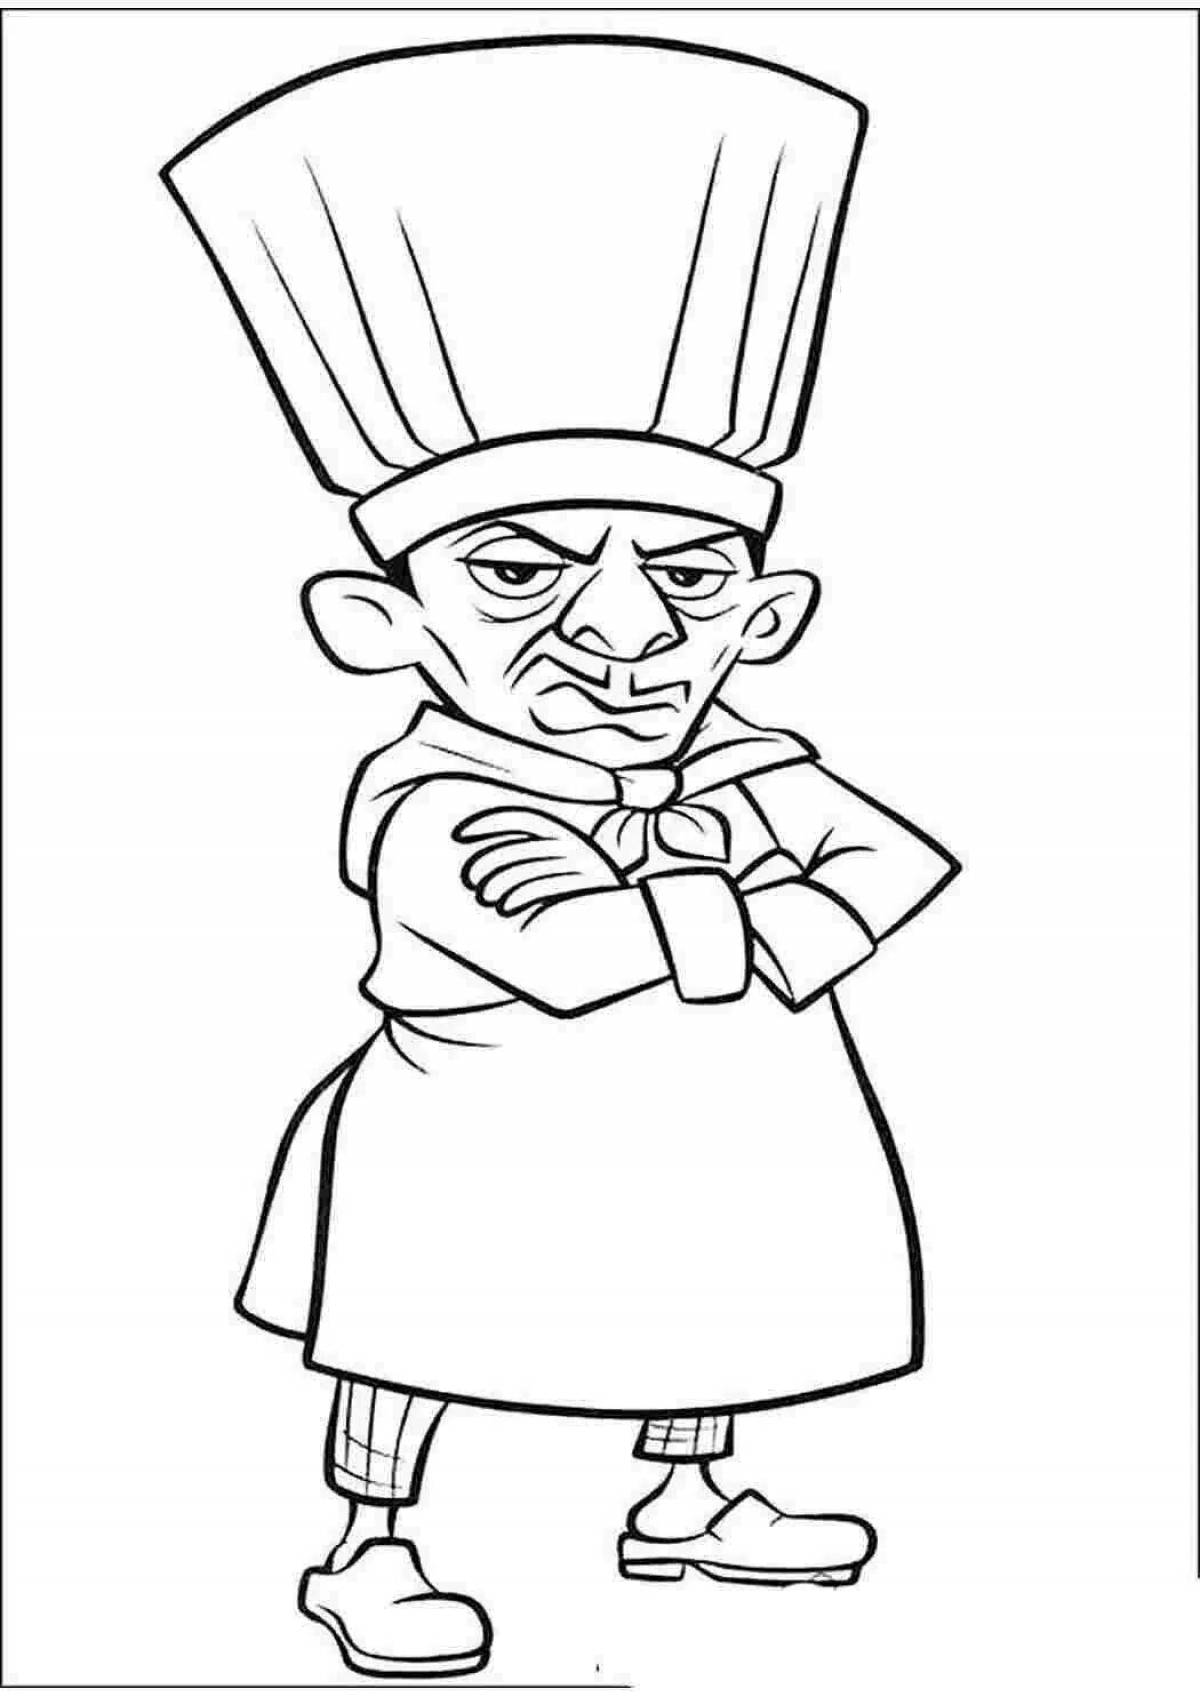 Coloring page witty cook